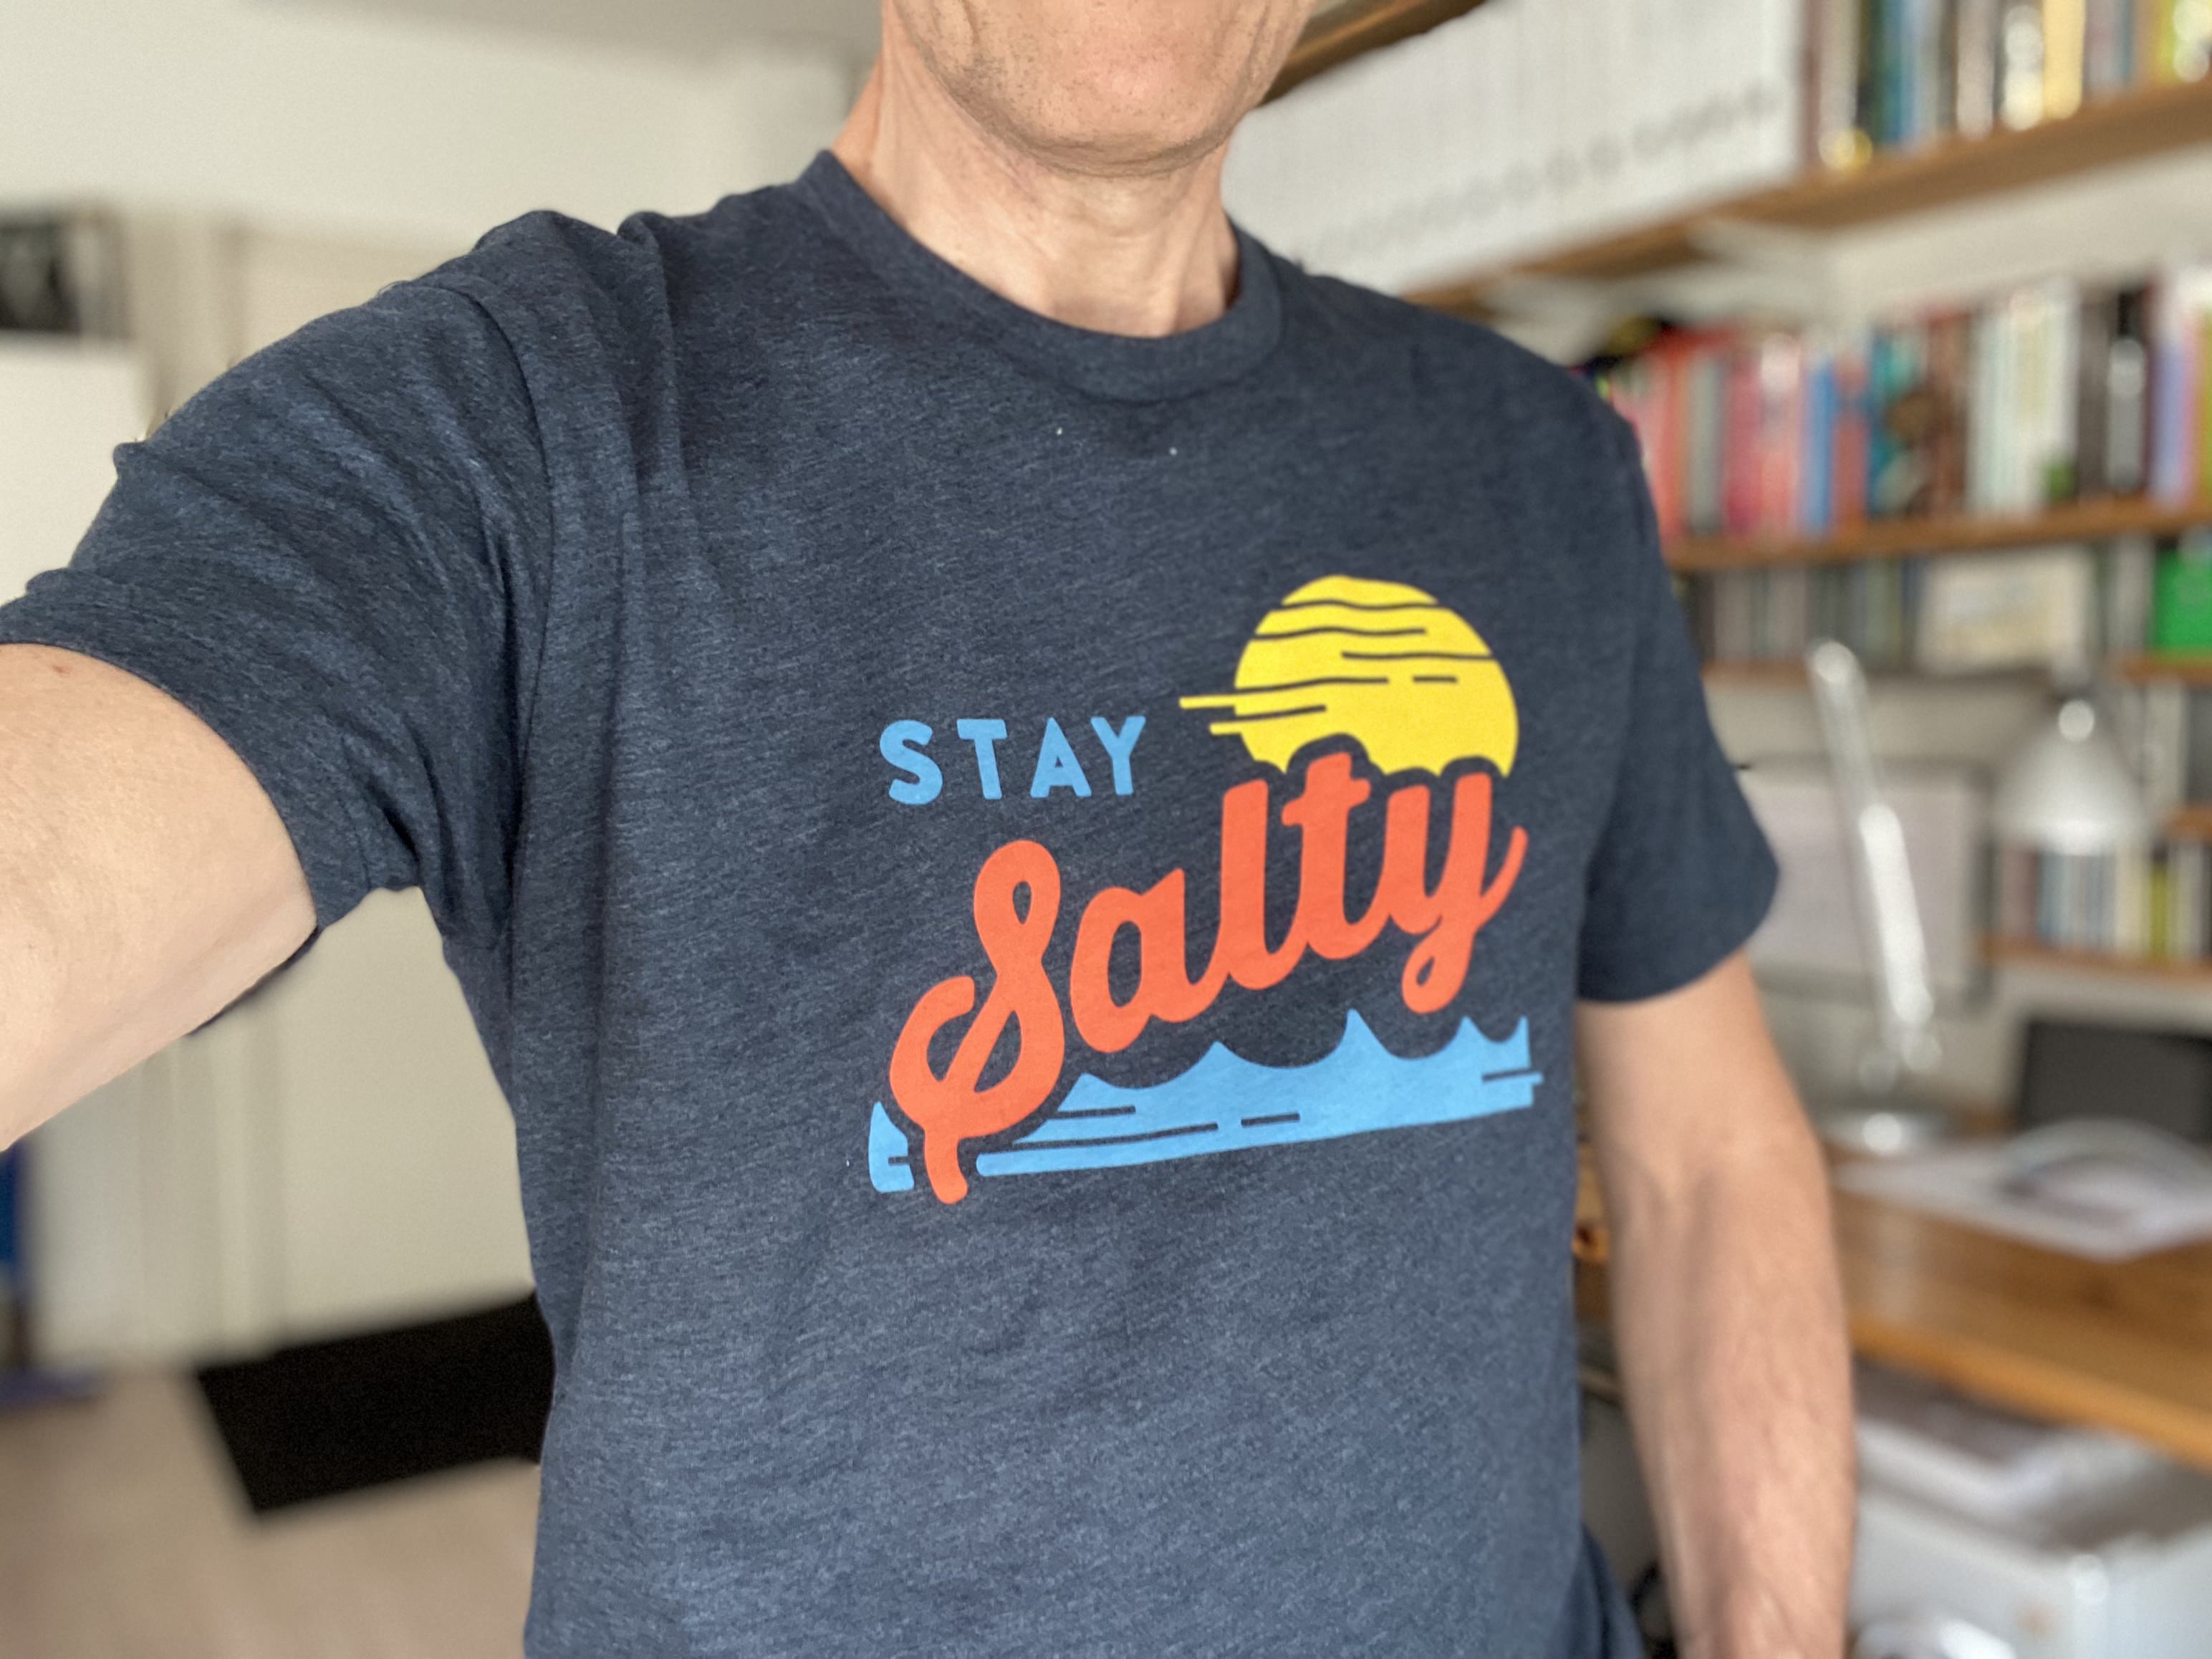 Stay salty t-shirt